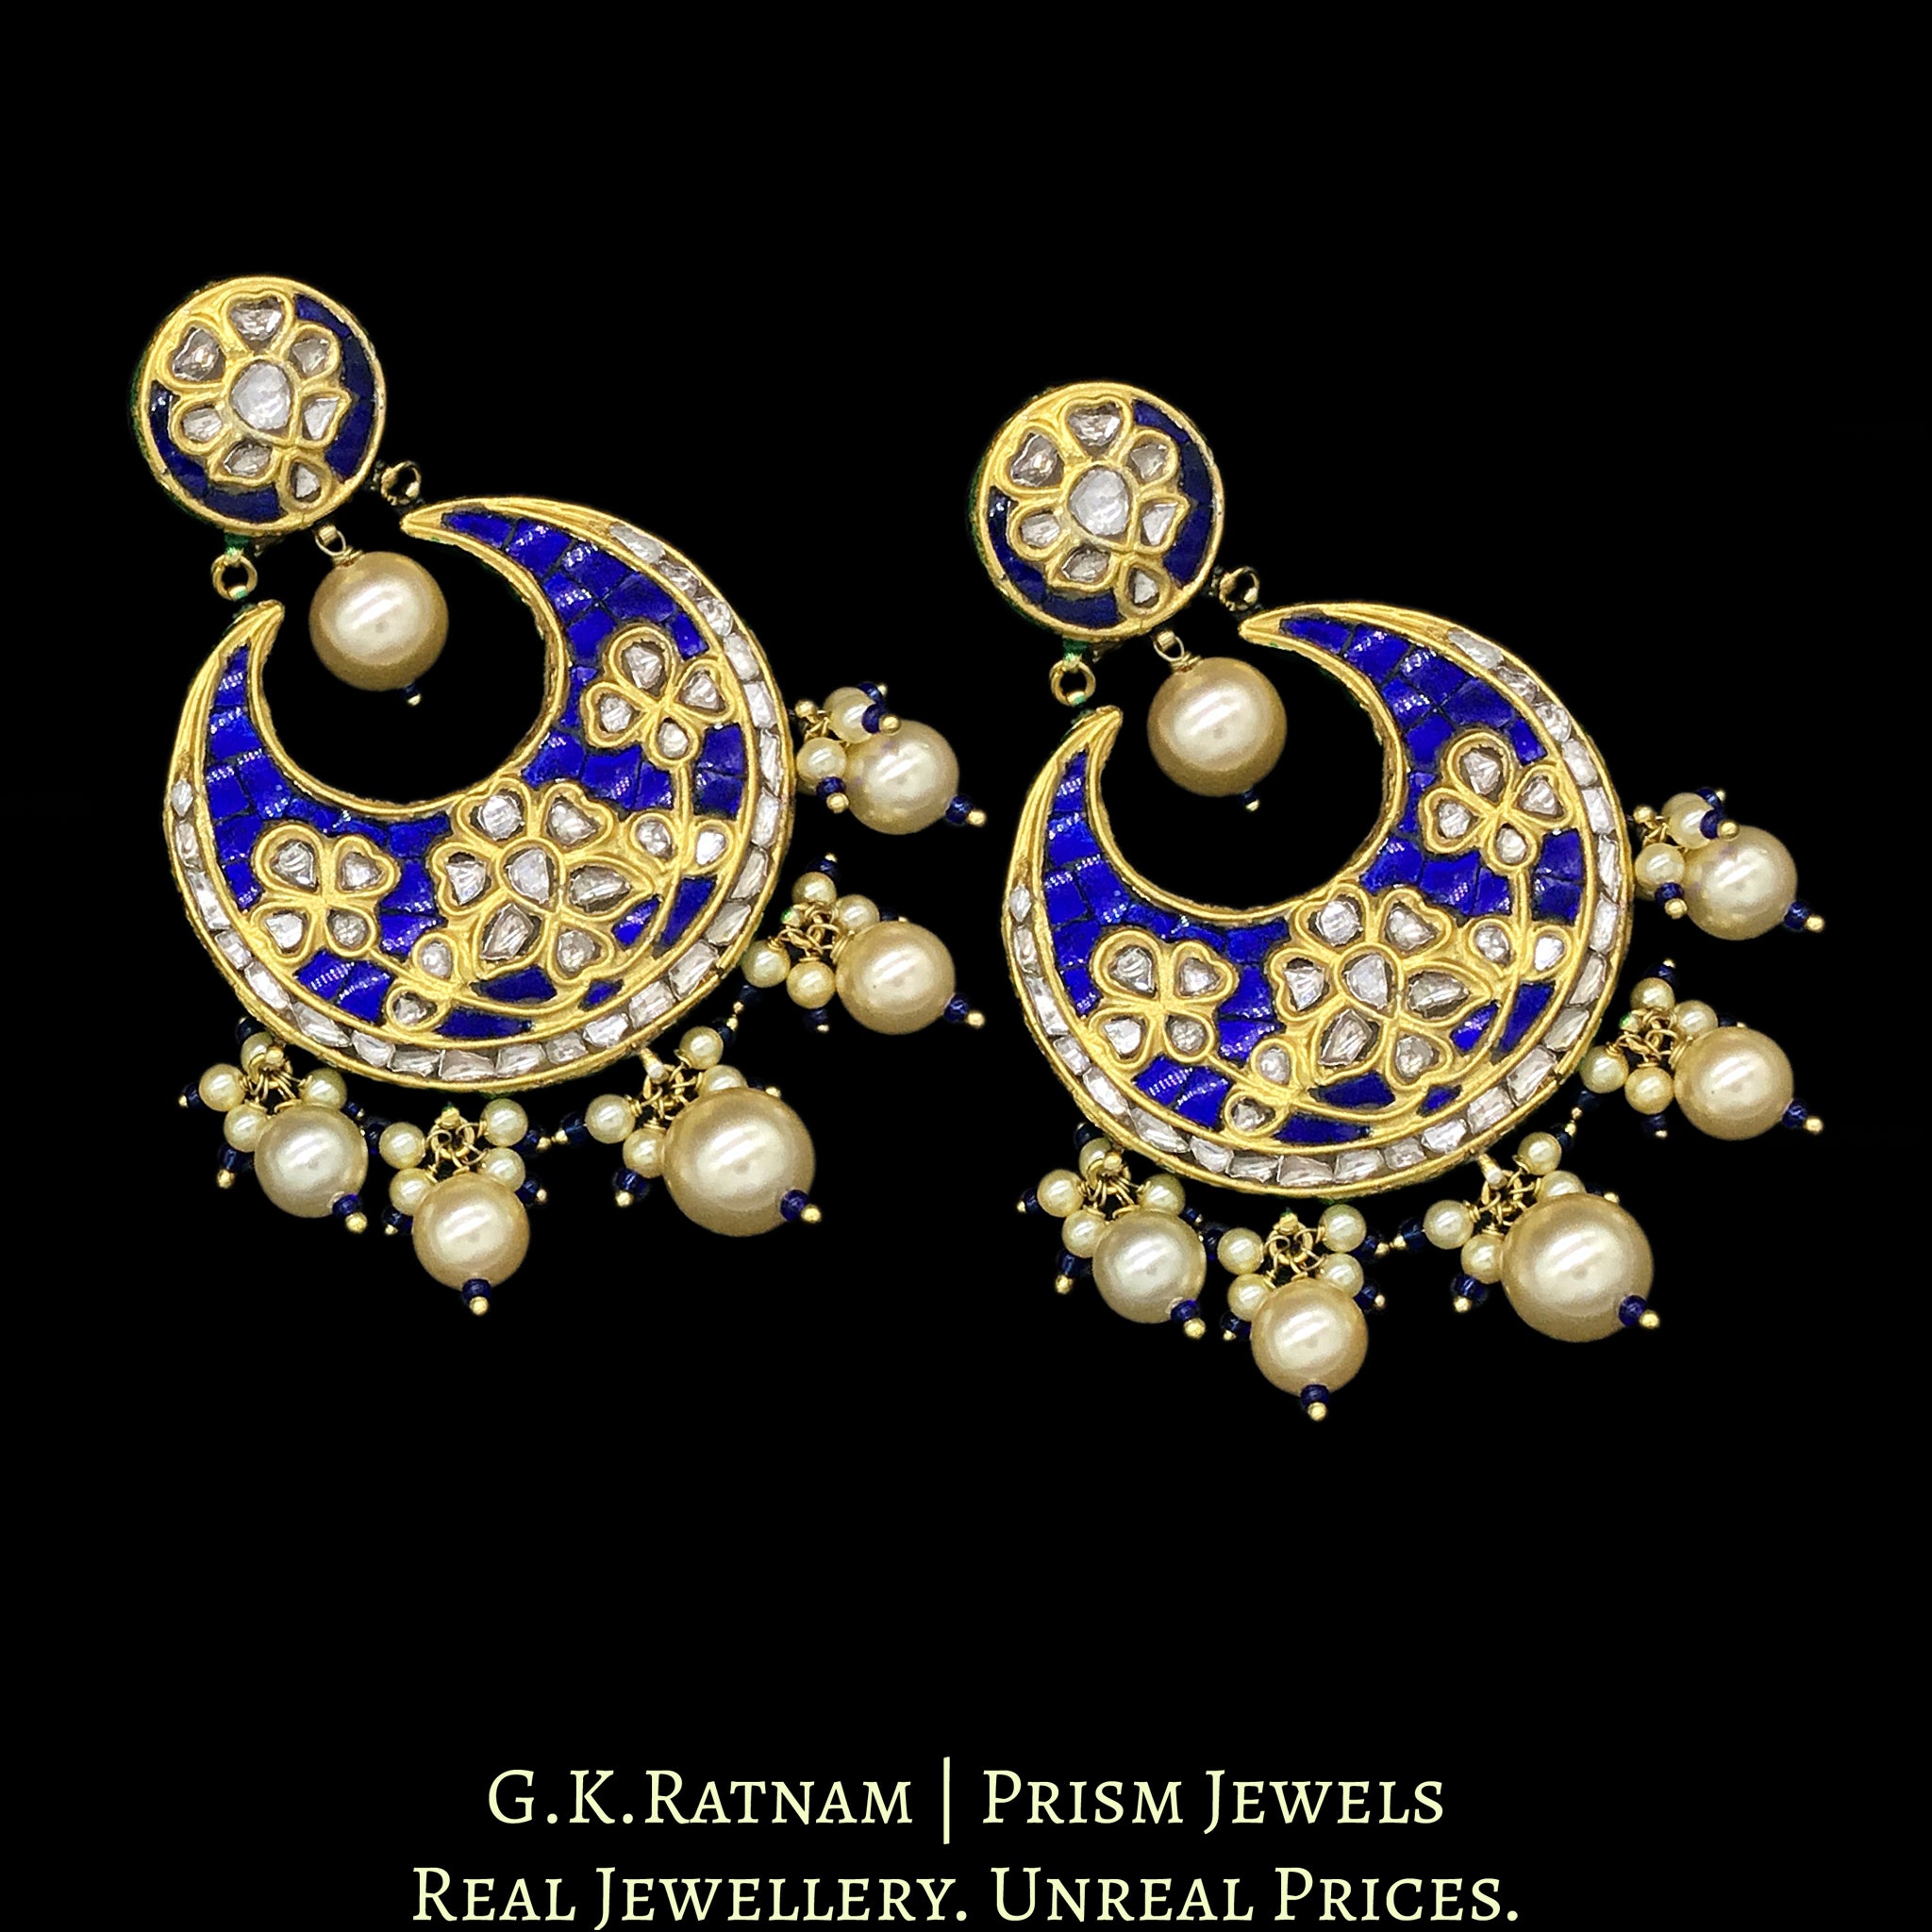 23k Gold and Diamond Polki Chand Bali Earring Pair with Blue stones set around uncuts - G. K. Ratnam